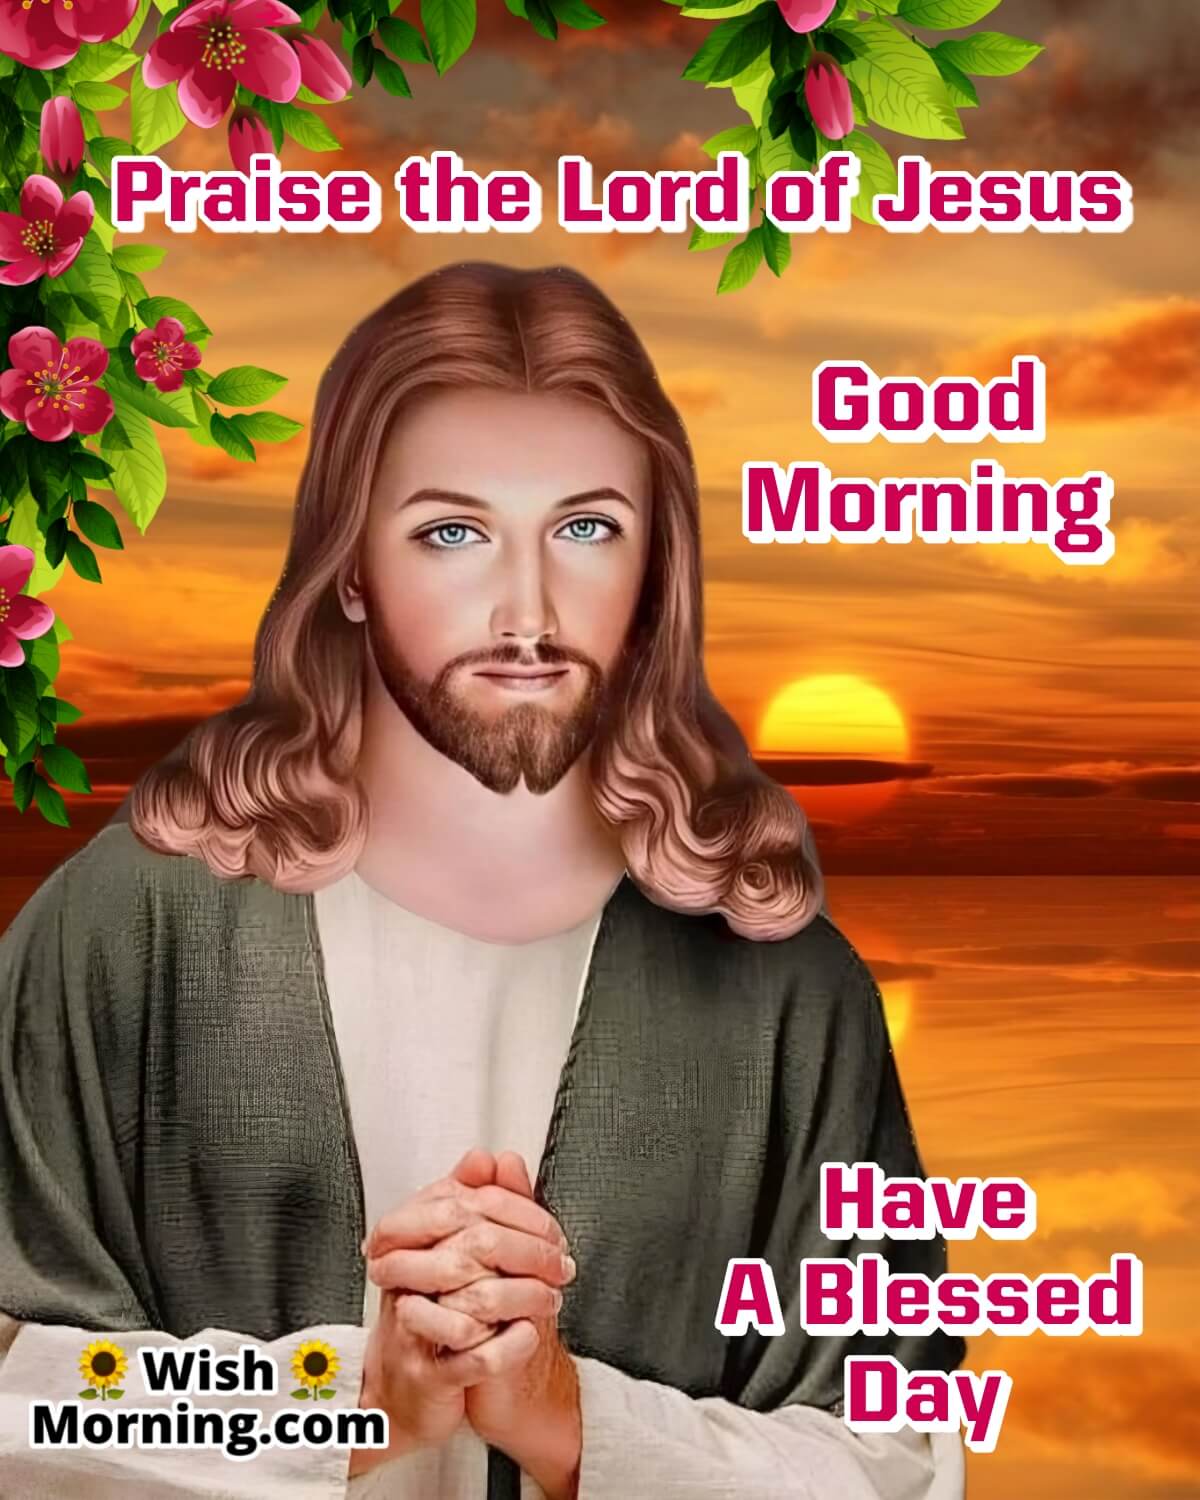 Good Morning Have A Blessed Day Jesus Pic